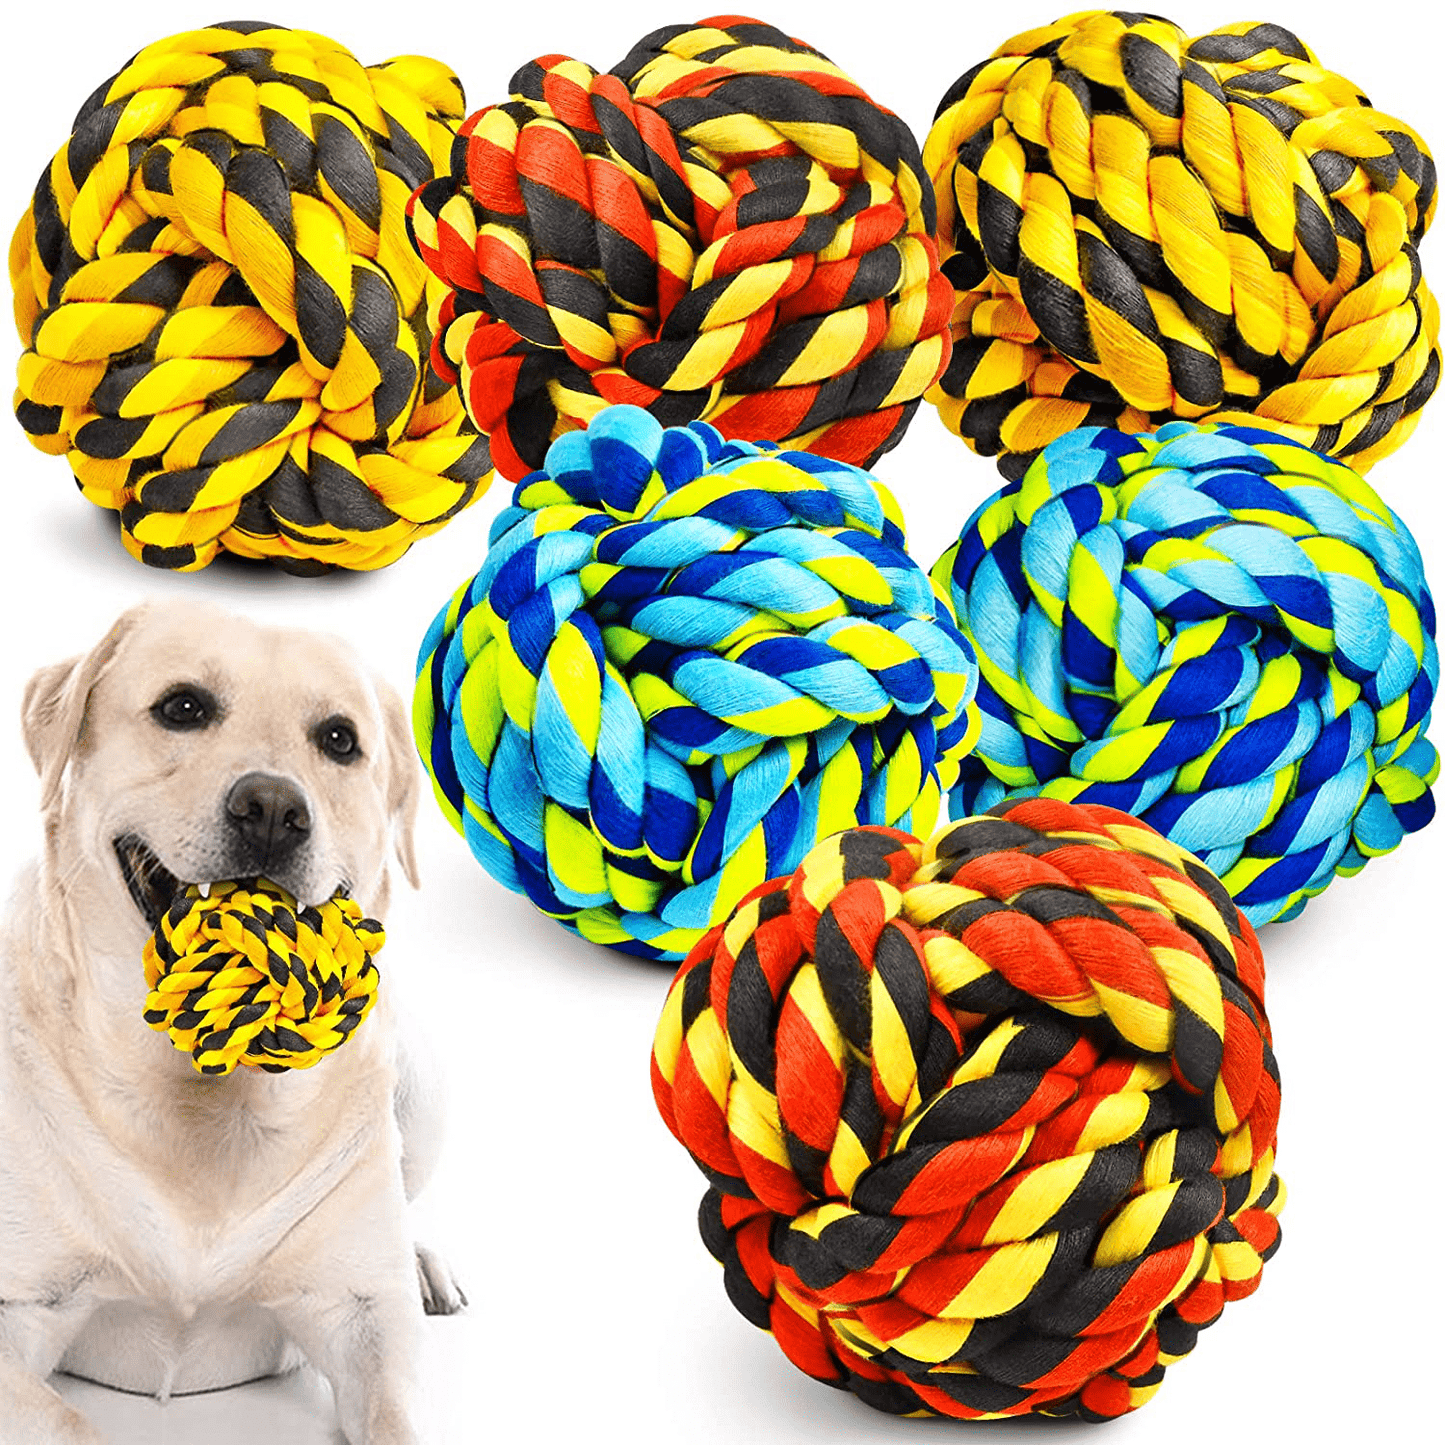 https://kol.pet/cdn/shop/products/xl-dog-chew-toys-for-aggressive-chewers-dog-balls-for-large-dogs-heavy-duty-dog-toys-with-tough-twisted-dental-cotton-dog-rope-toy-for-medium-dogs-6-pack-indestructible-puppy-teething_82813ec6-7ee7-4f56-944b-66c18c13105d_1445x.png?v=1675839242